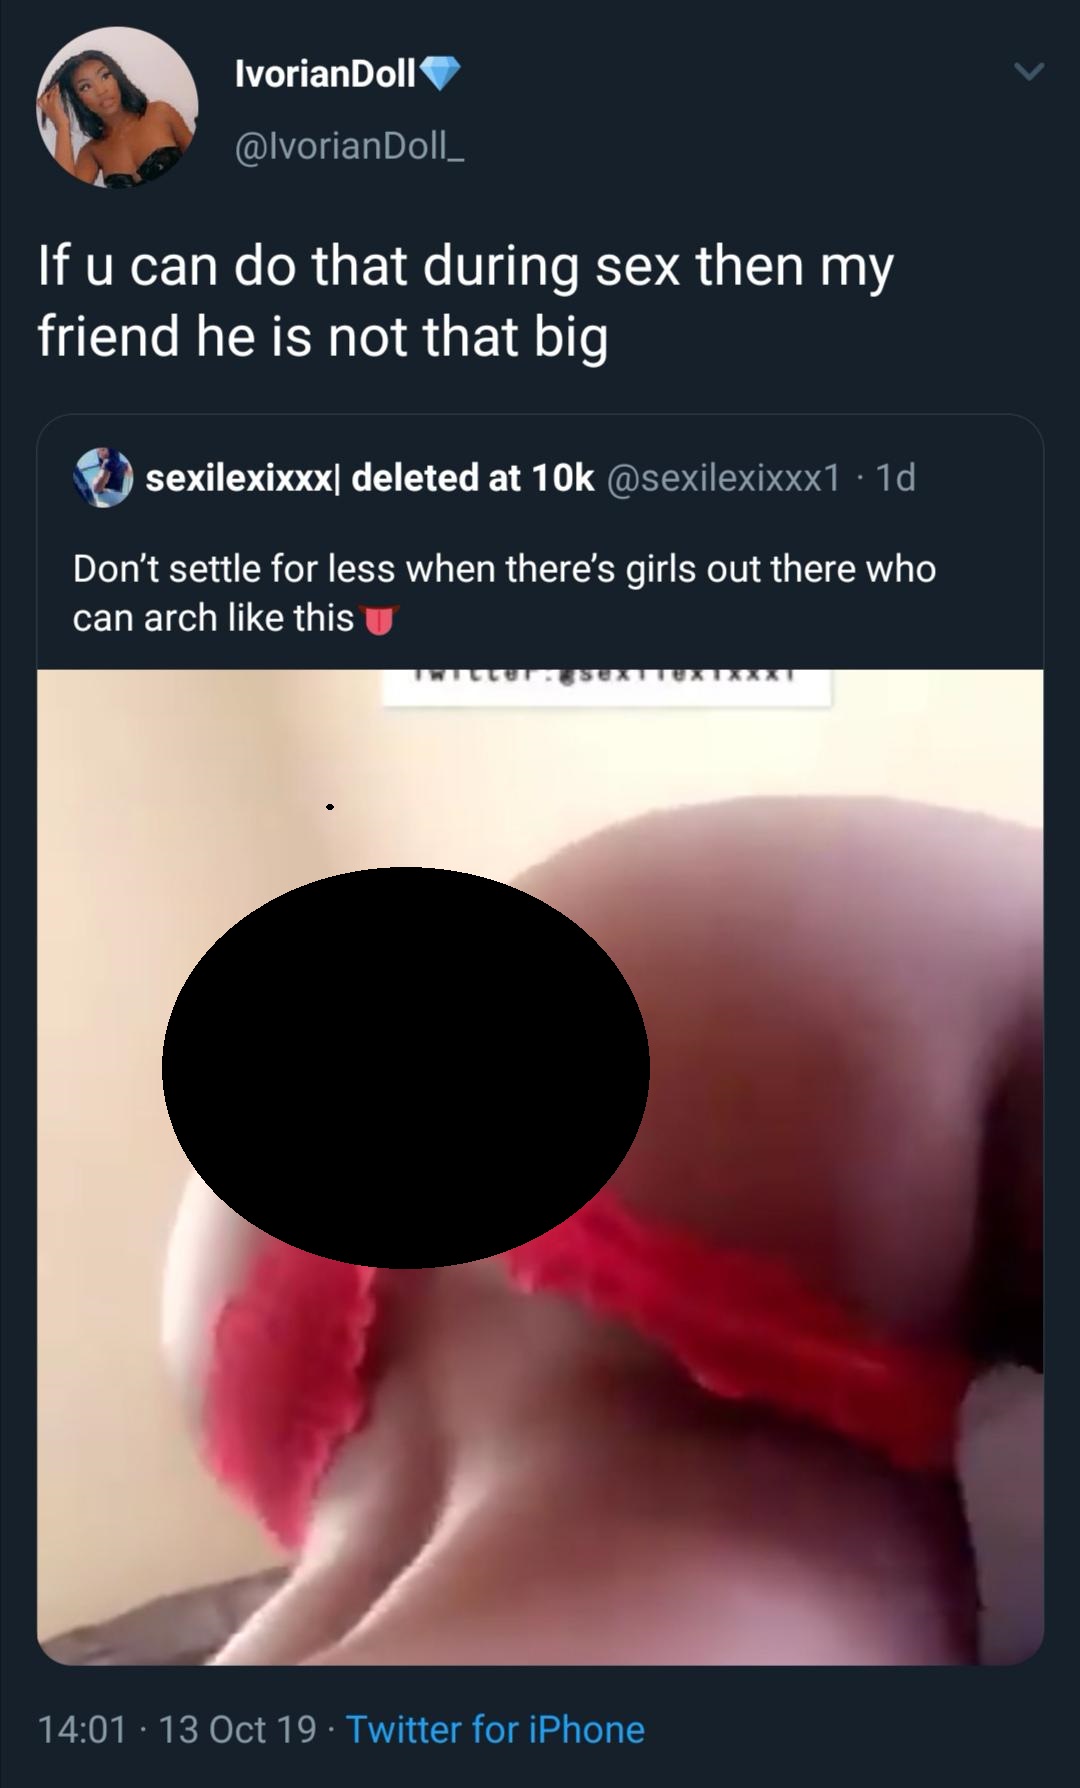 If u can do that during sex then my friend he is not that big 2 sexilexixxxl deleted at 10k 1d Don't settle for less when there's girls out there who can arch this u 13 Oct 19 Twitter for iPhone